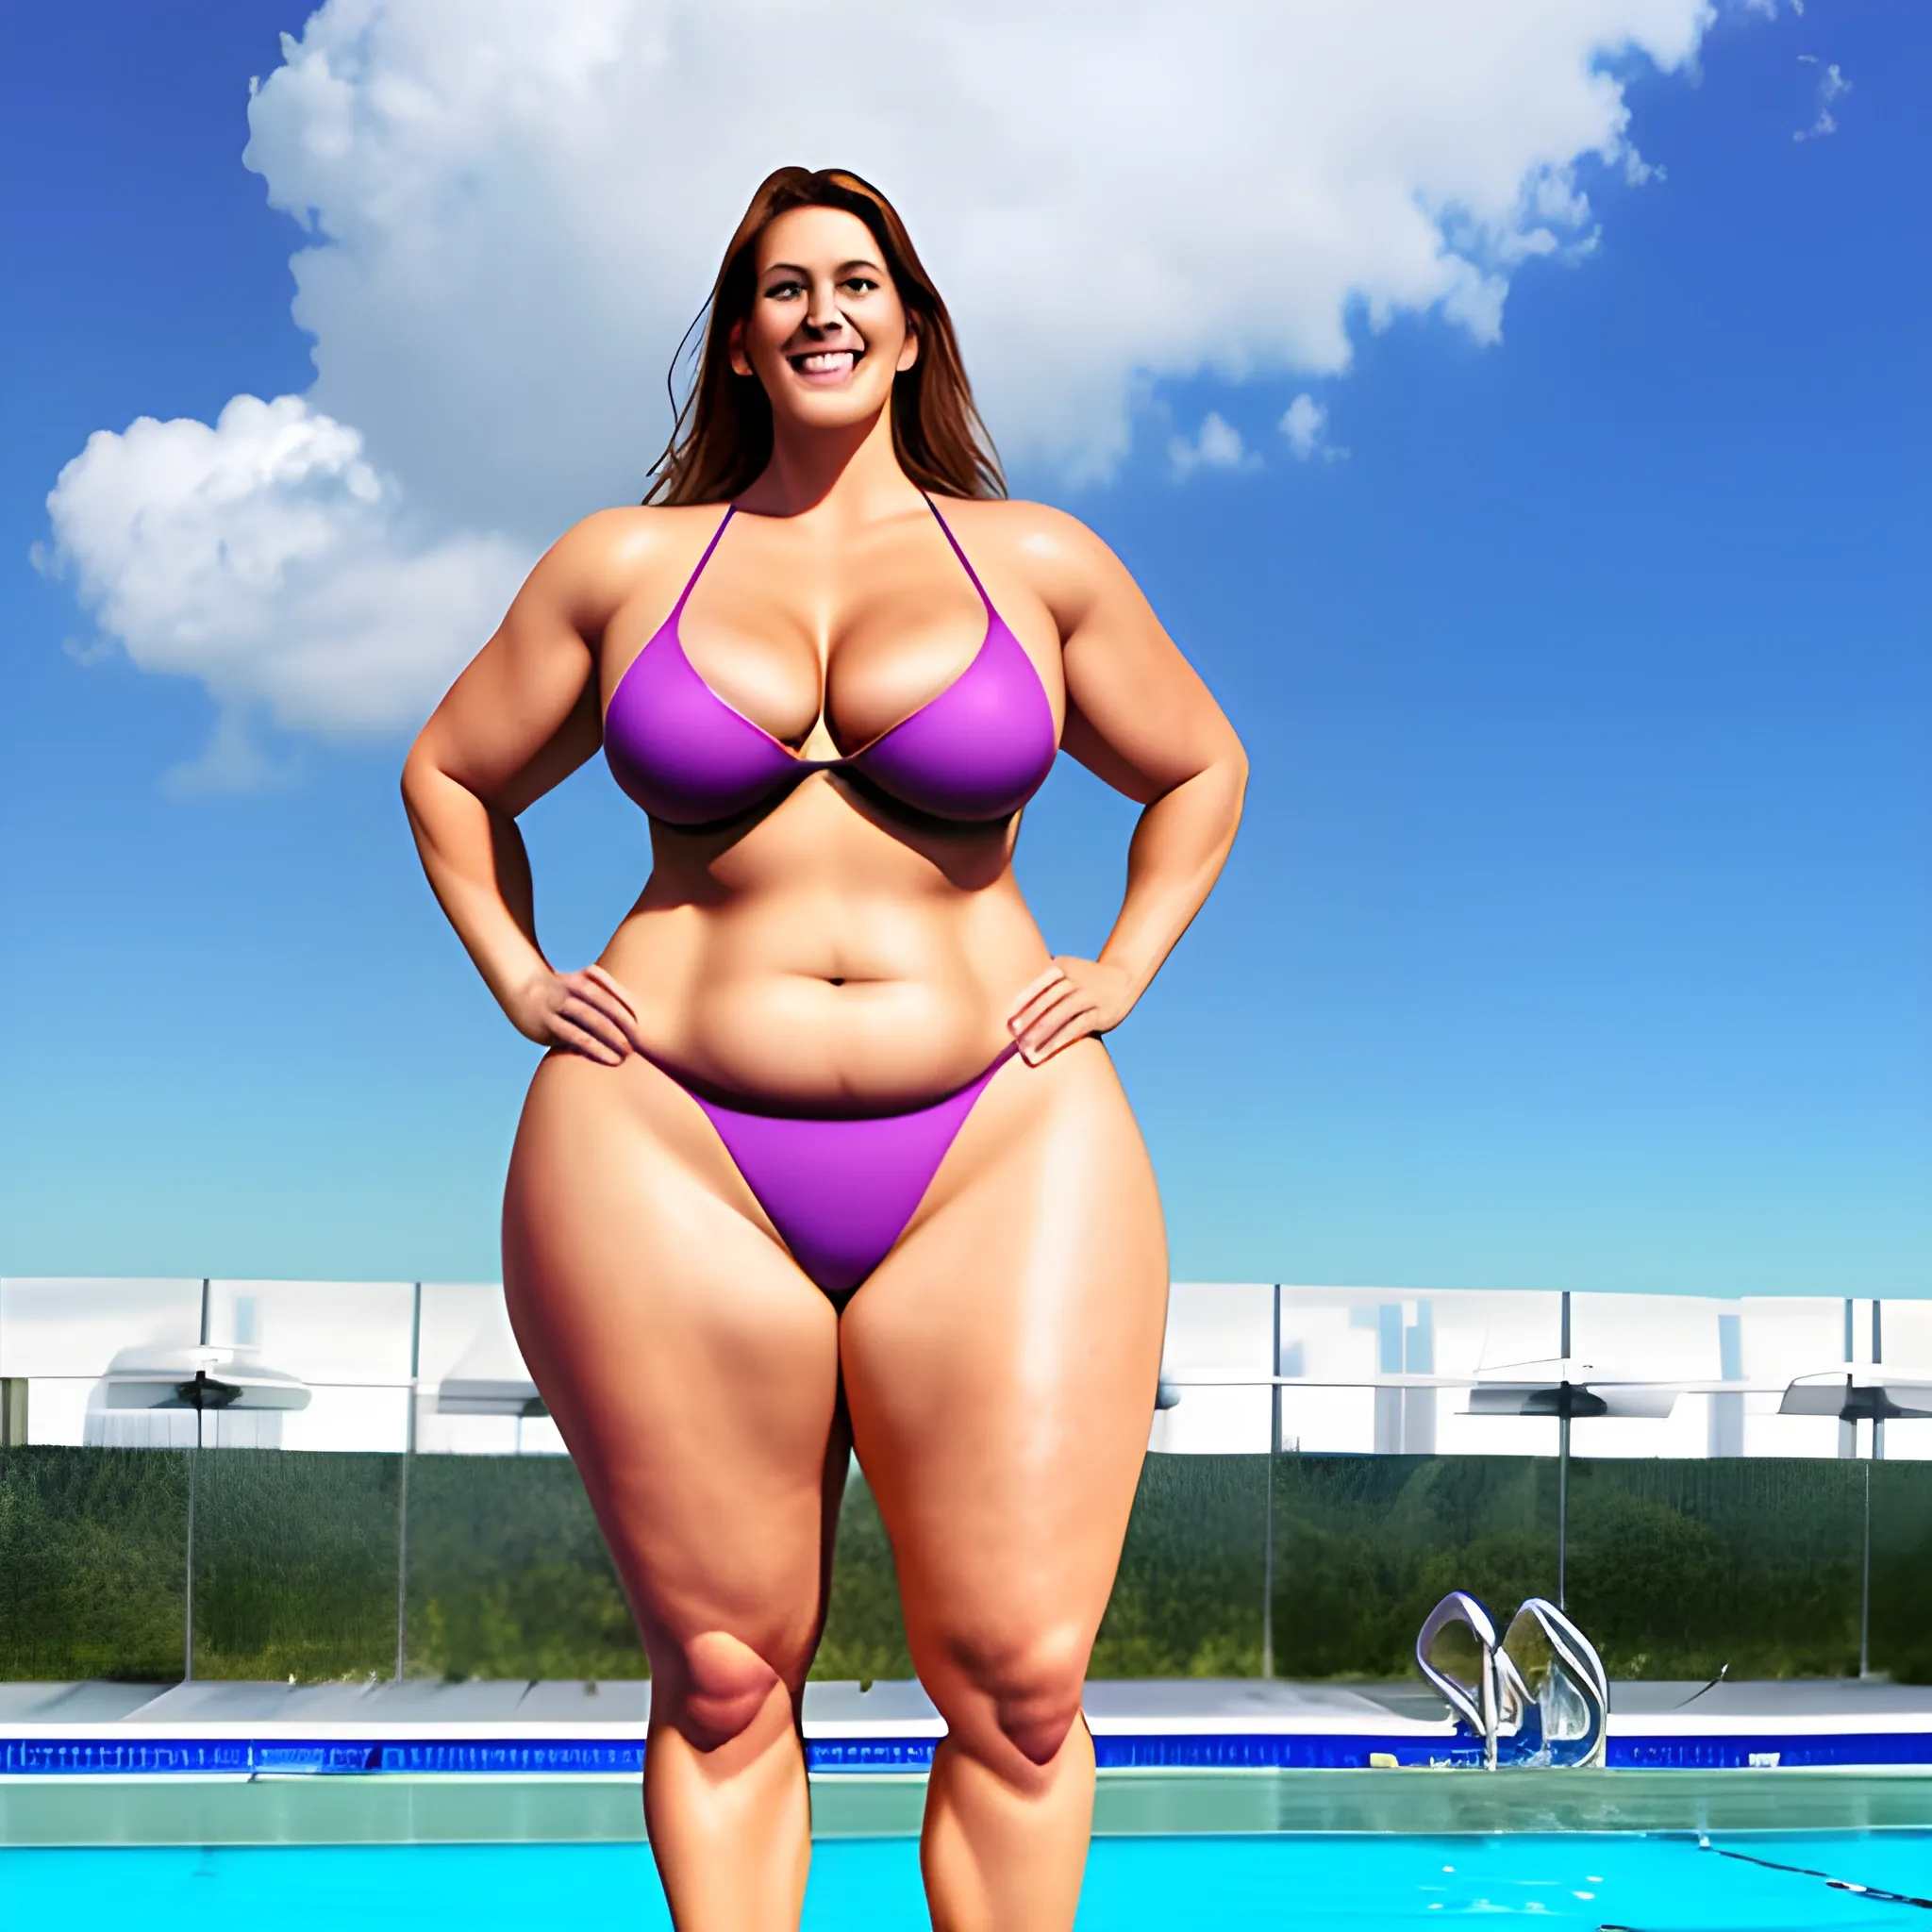 very tall large plus size muscular lovely, not curvy, blonde young girl with small head, very broad shoulders, straight body, small narrow pelvis, narrow slim hips, long thighs and legs, towering with little smile at swimming pool under the clouds 